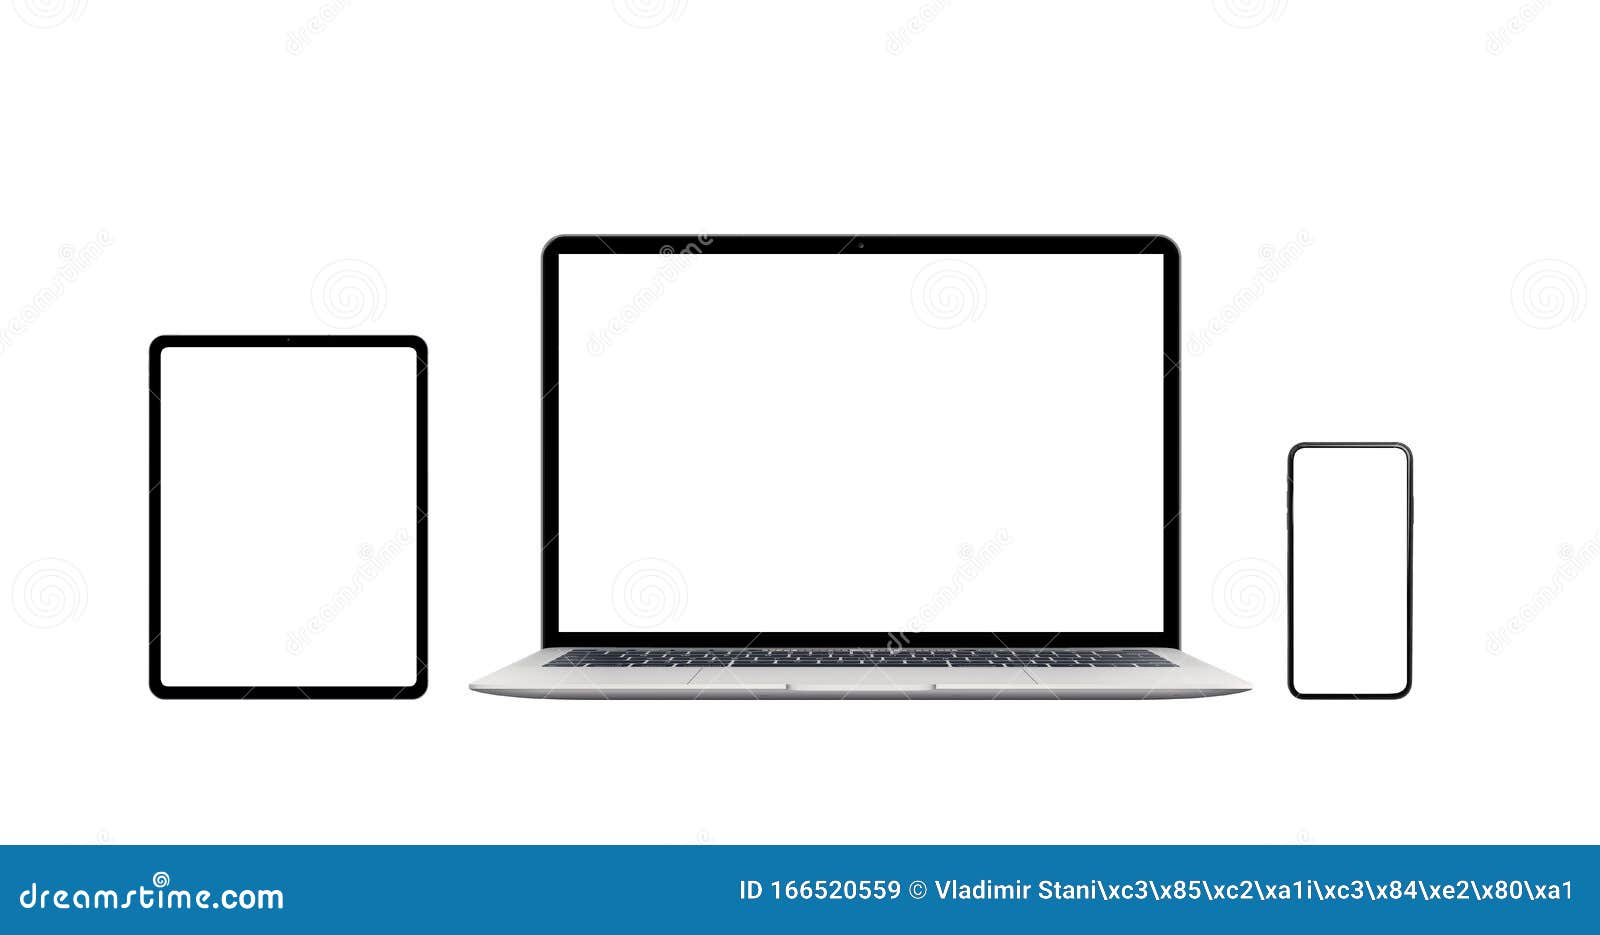 laptop, phone and tablet . modern devices with thin edges